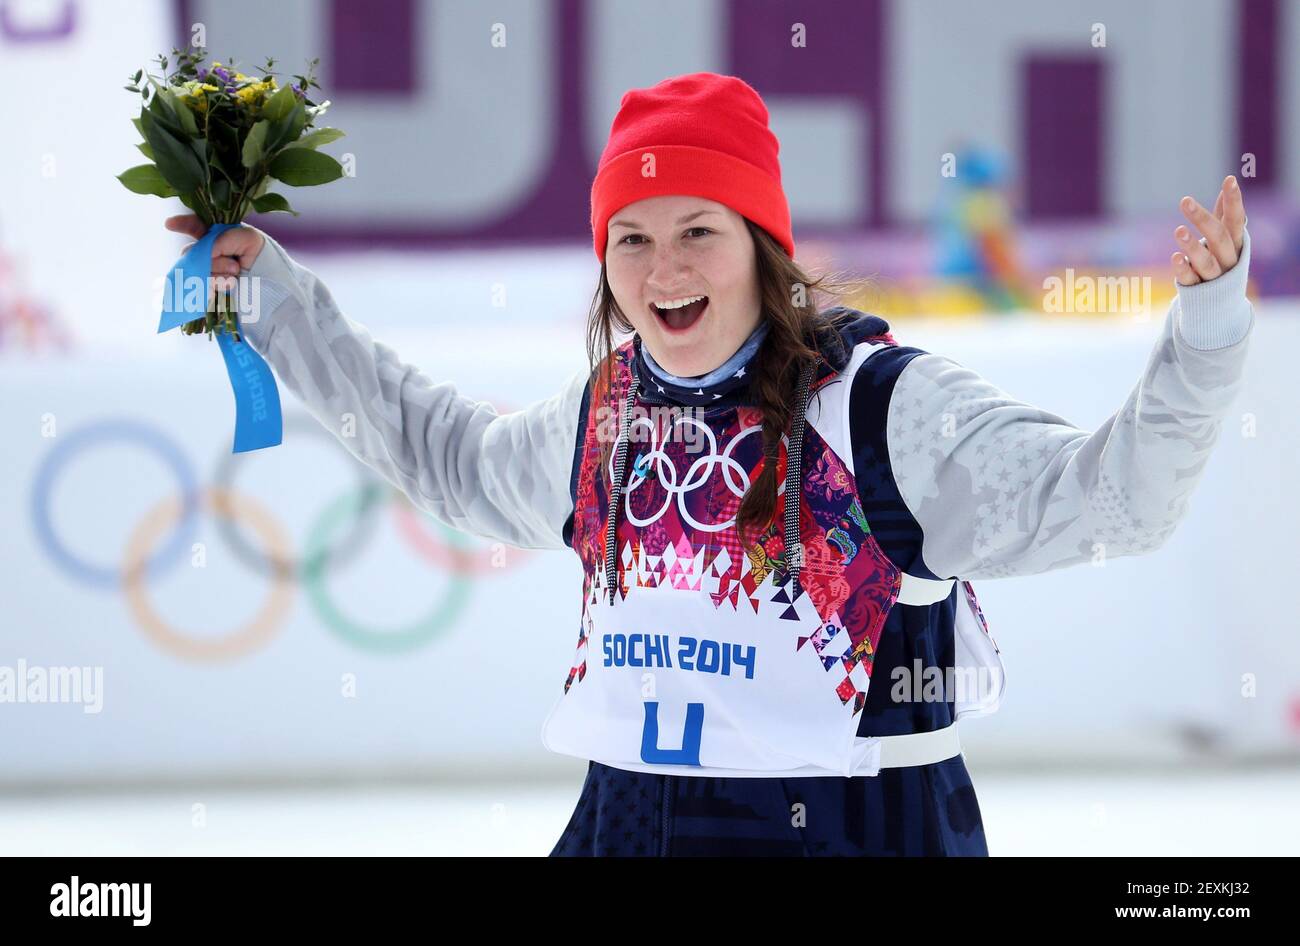 Devin Logan, of the USA, celebrates her silver medal in the ladies' ski slopestyle at the Rosa Khutor Extreme Park during the Winter Olympics in Sochi, Russia, Tuesday, Feb. 11, 2014. (Photo by Brian Cassella/Chicago Tribune/MCT/Sipa USA) Stock Photo